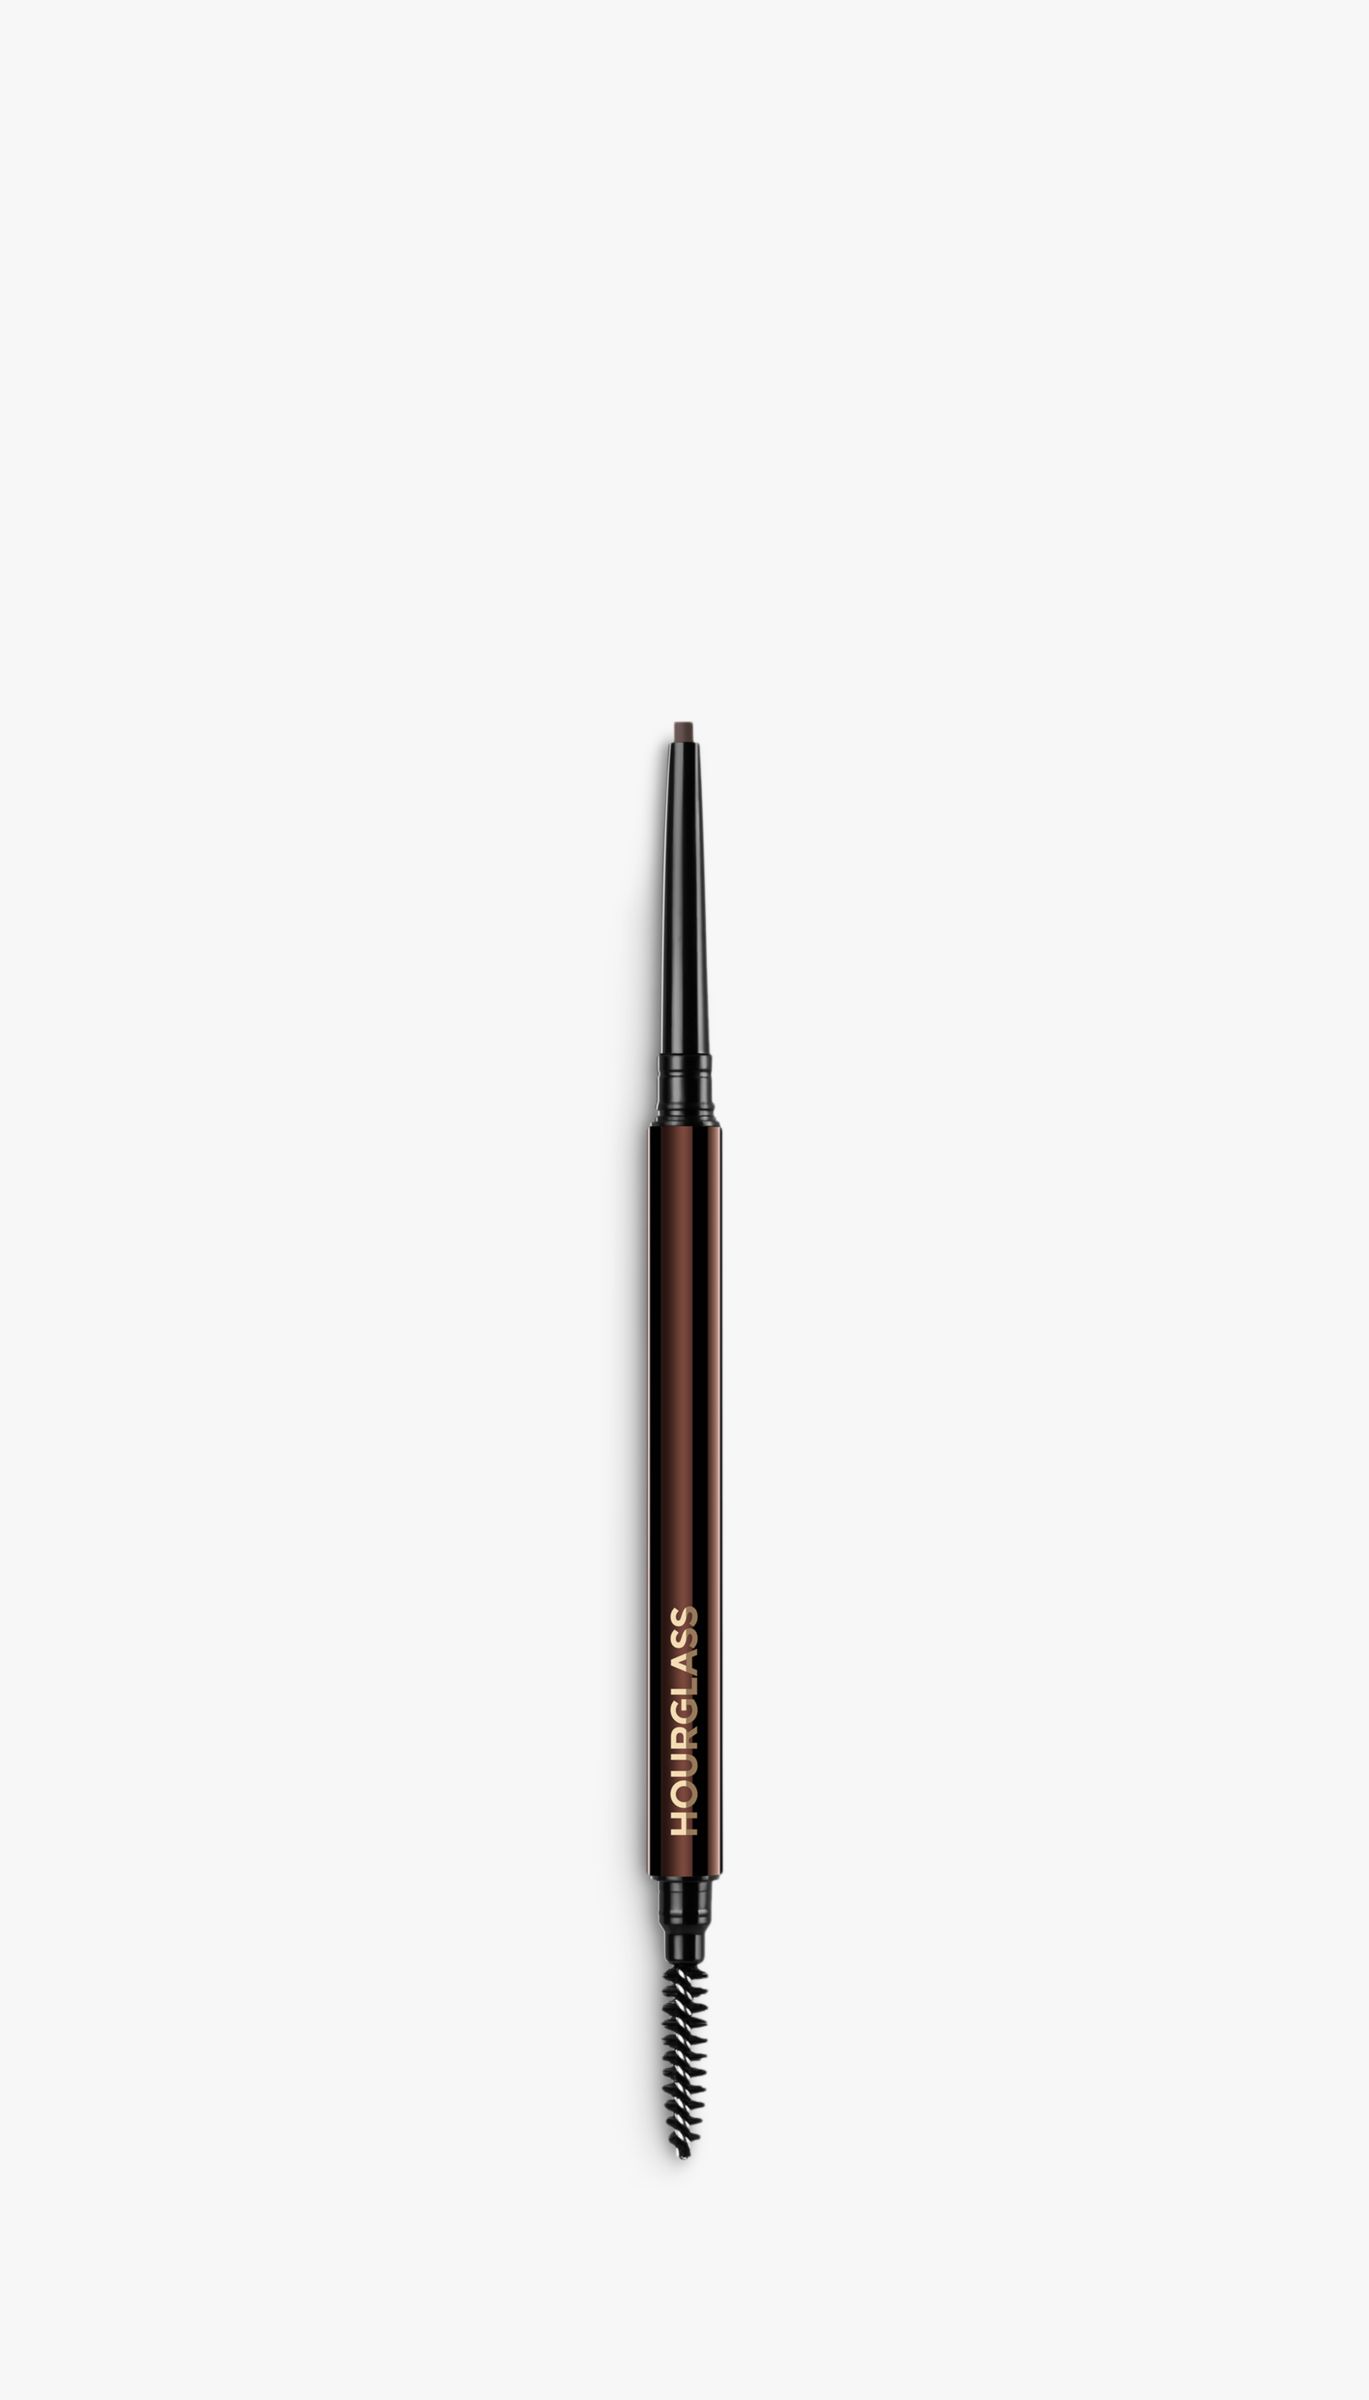 Hourglass Arch™ Brow Micro Sculpting Pencil, Ash 1